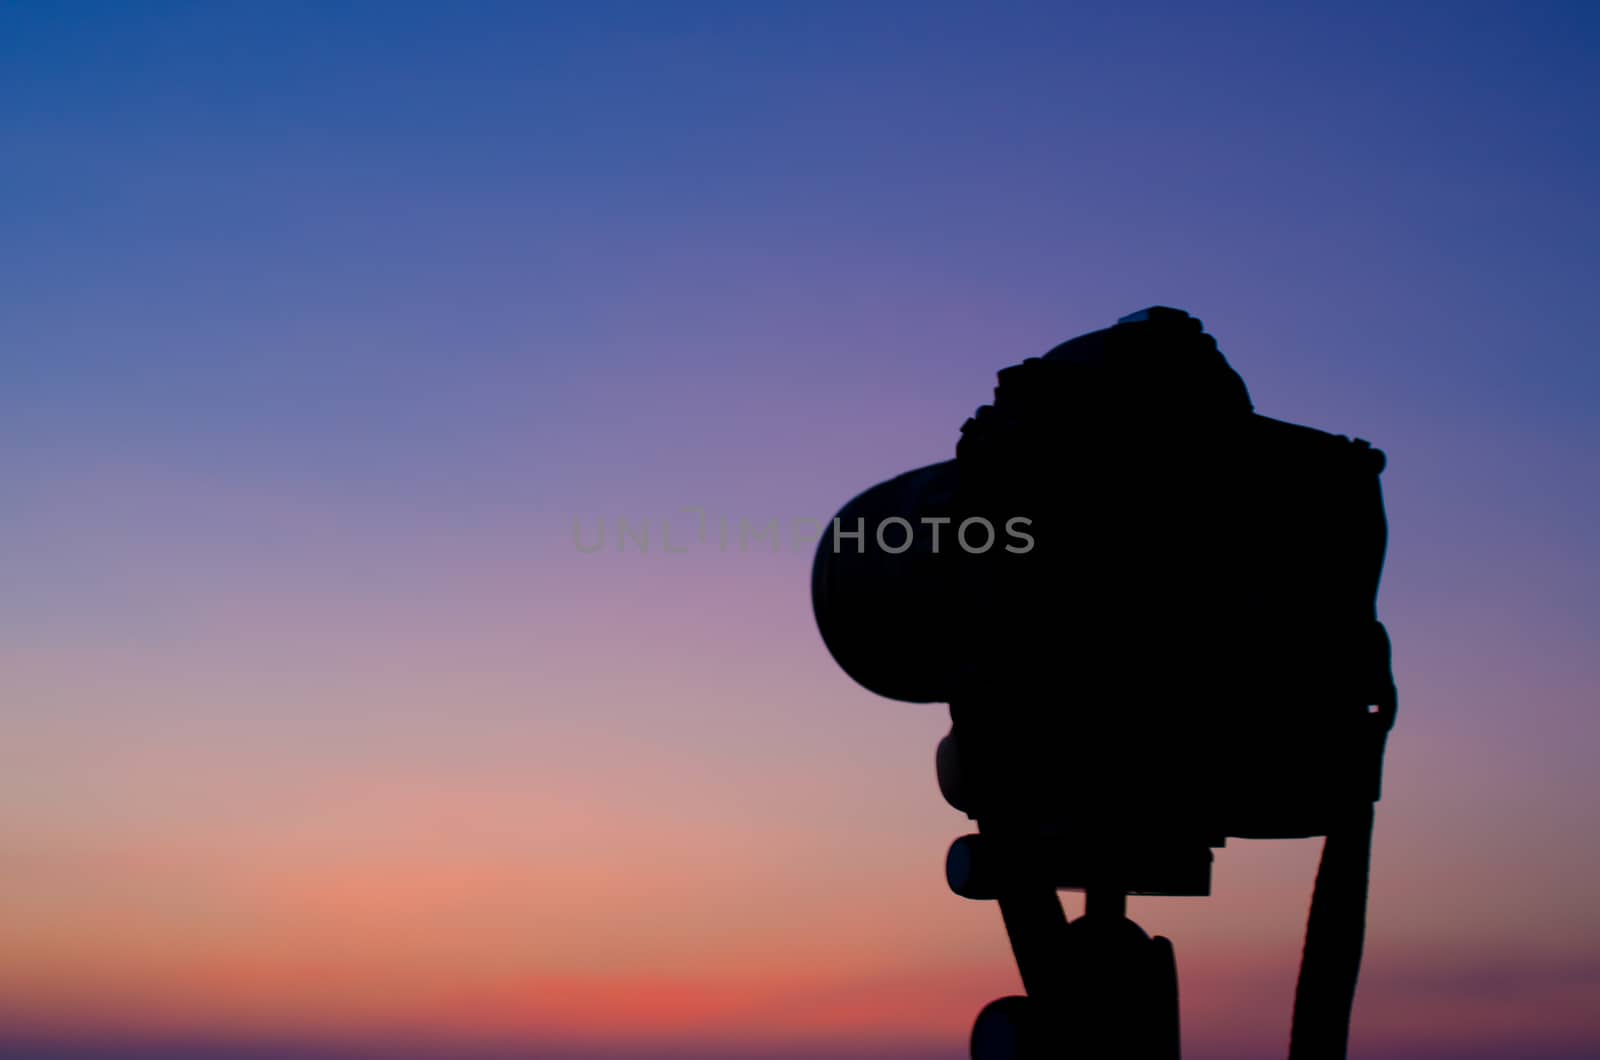 Silhouette of DSLR camera at sea with sunset sky by pixbox77